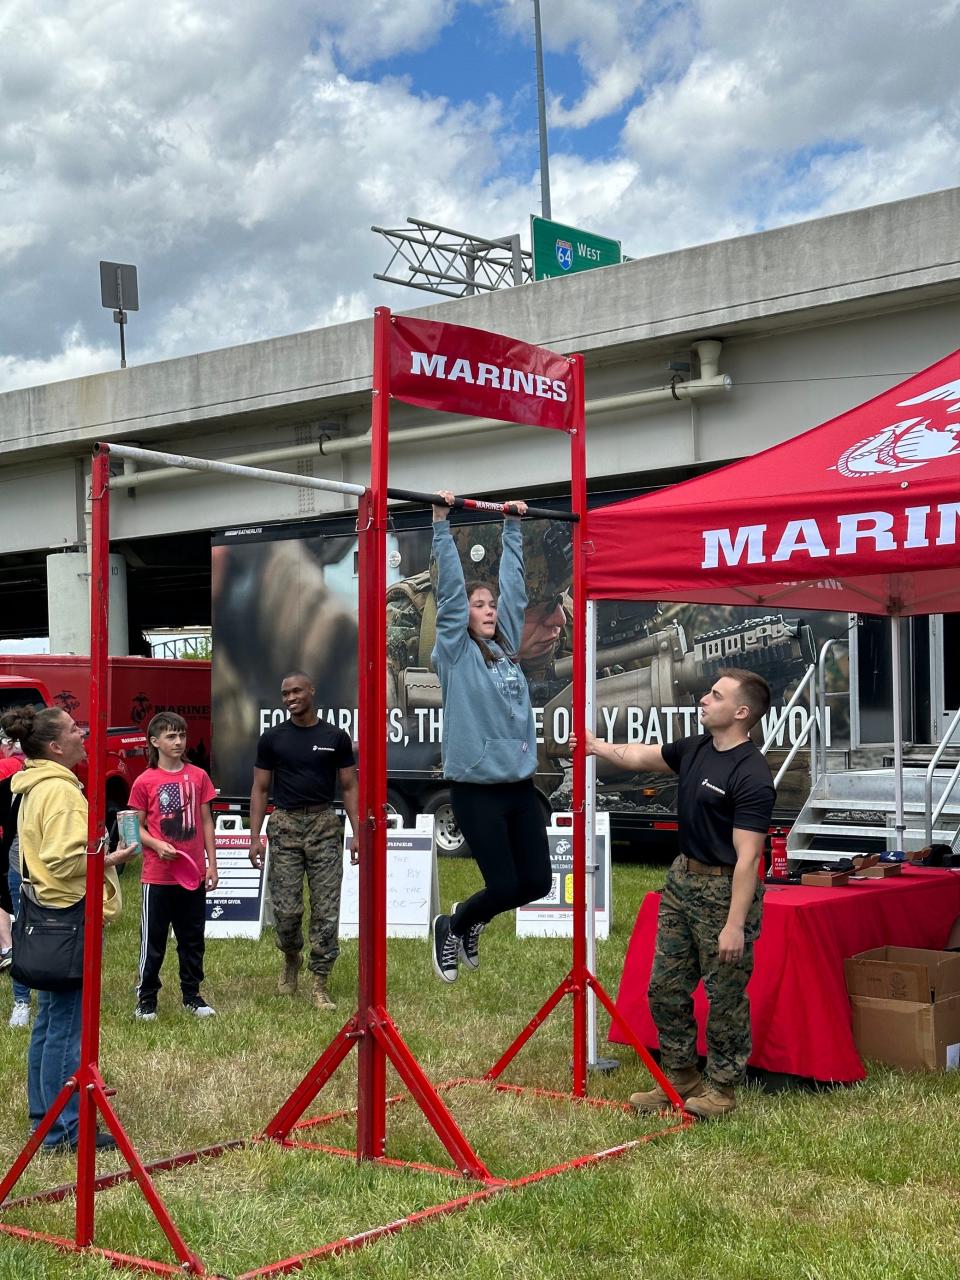 Grace Coleman, 14, and her family come to Thunder every year and bring their camper, parking it across the street from Waterfront Park. Her favorite part of Thunder, she said, are the different armed forces stations. She took on the pull-up challenge at the U.S. Marine Corps station.